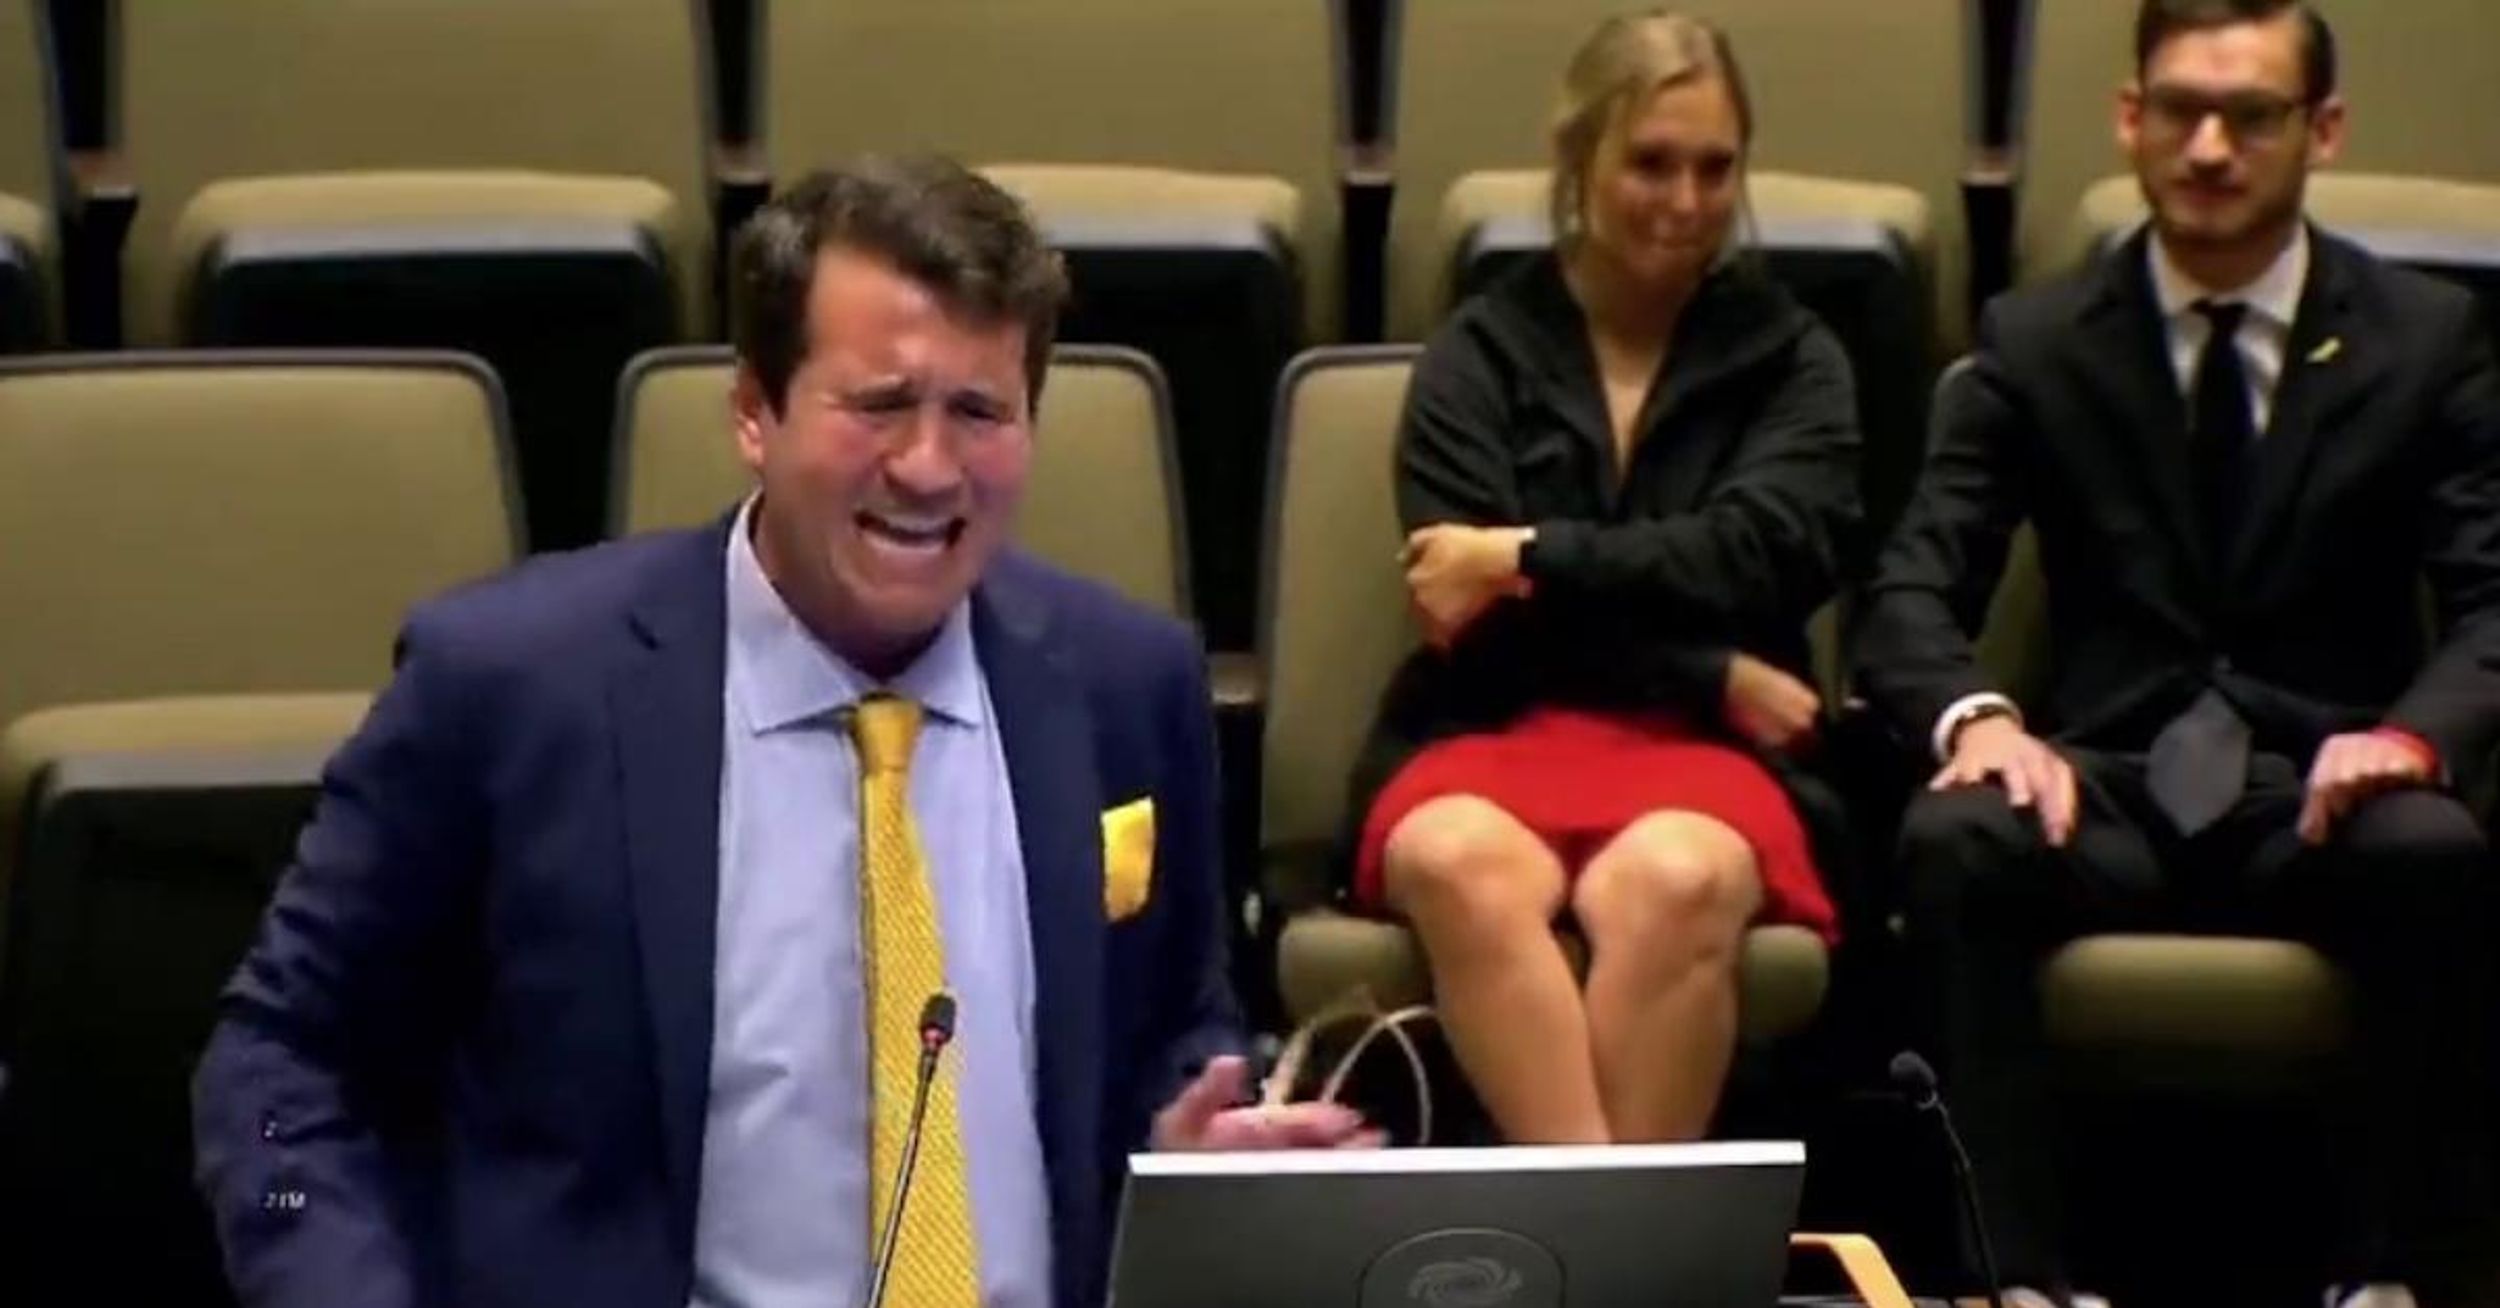 Comedian Goes Viral After Trolling Texas City Council Meeting With Bonkers Rap About Killing Putin